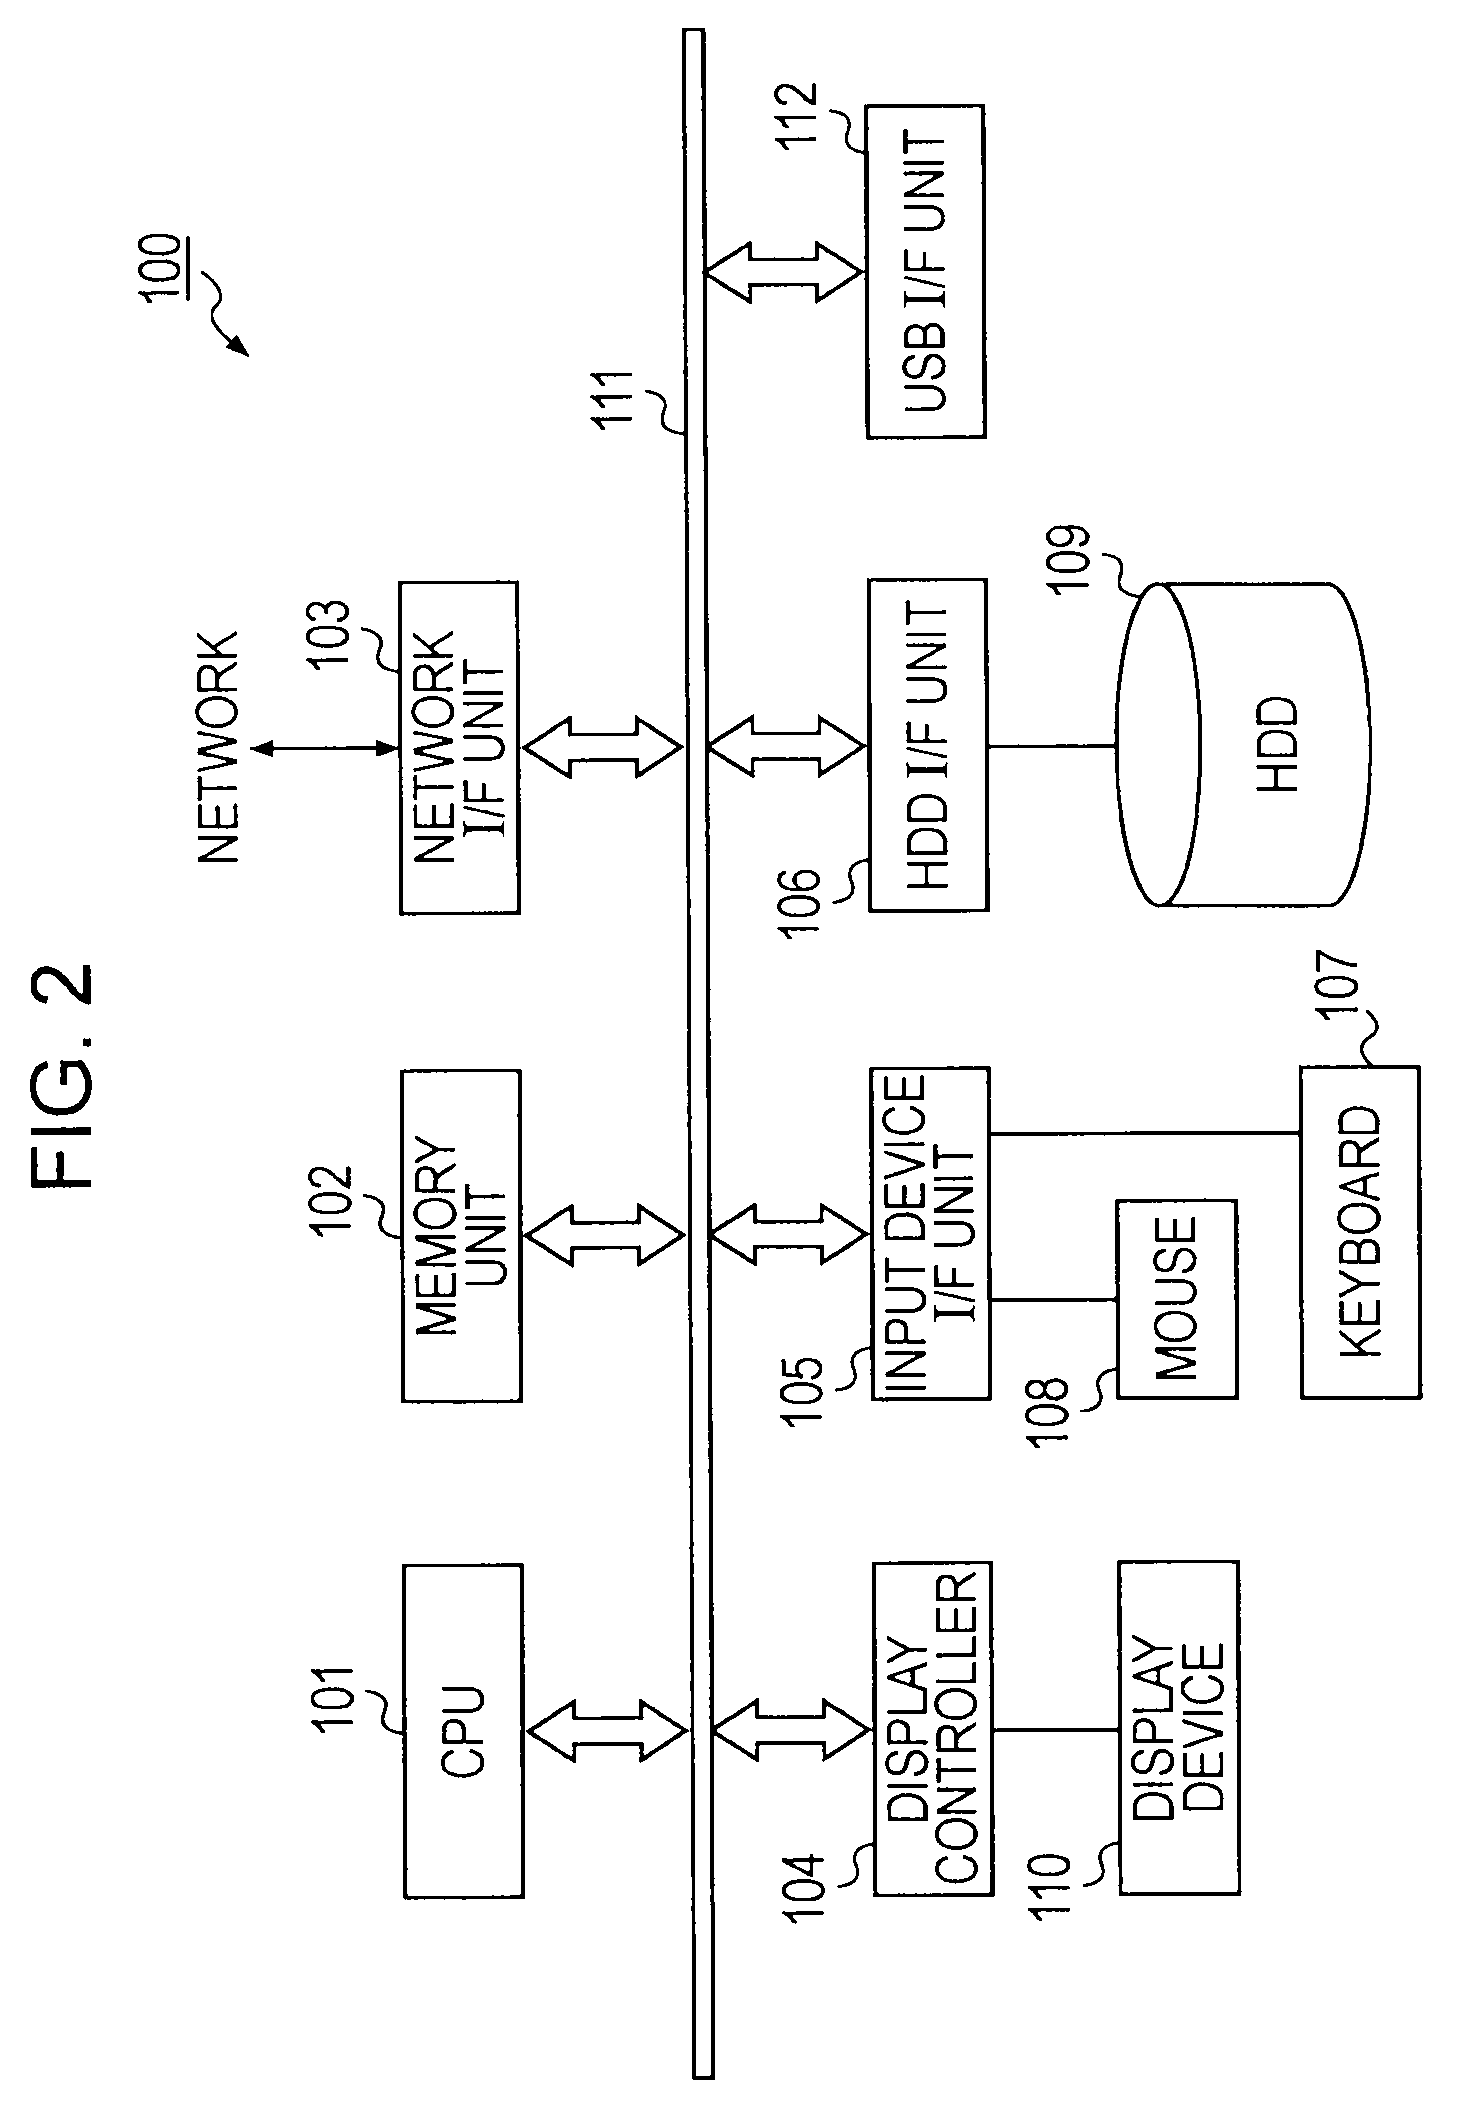 Peripheral device, method of operating peripheral device, host device, method of operating host device, and electronic device system